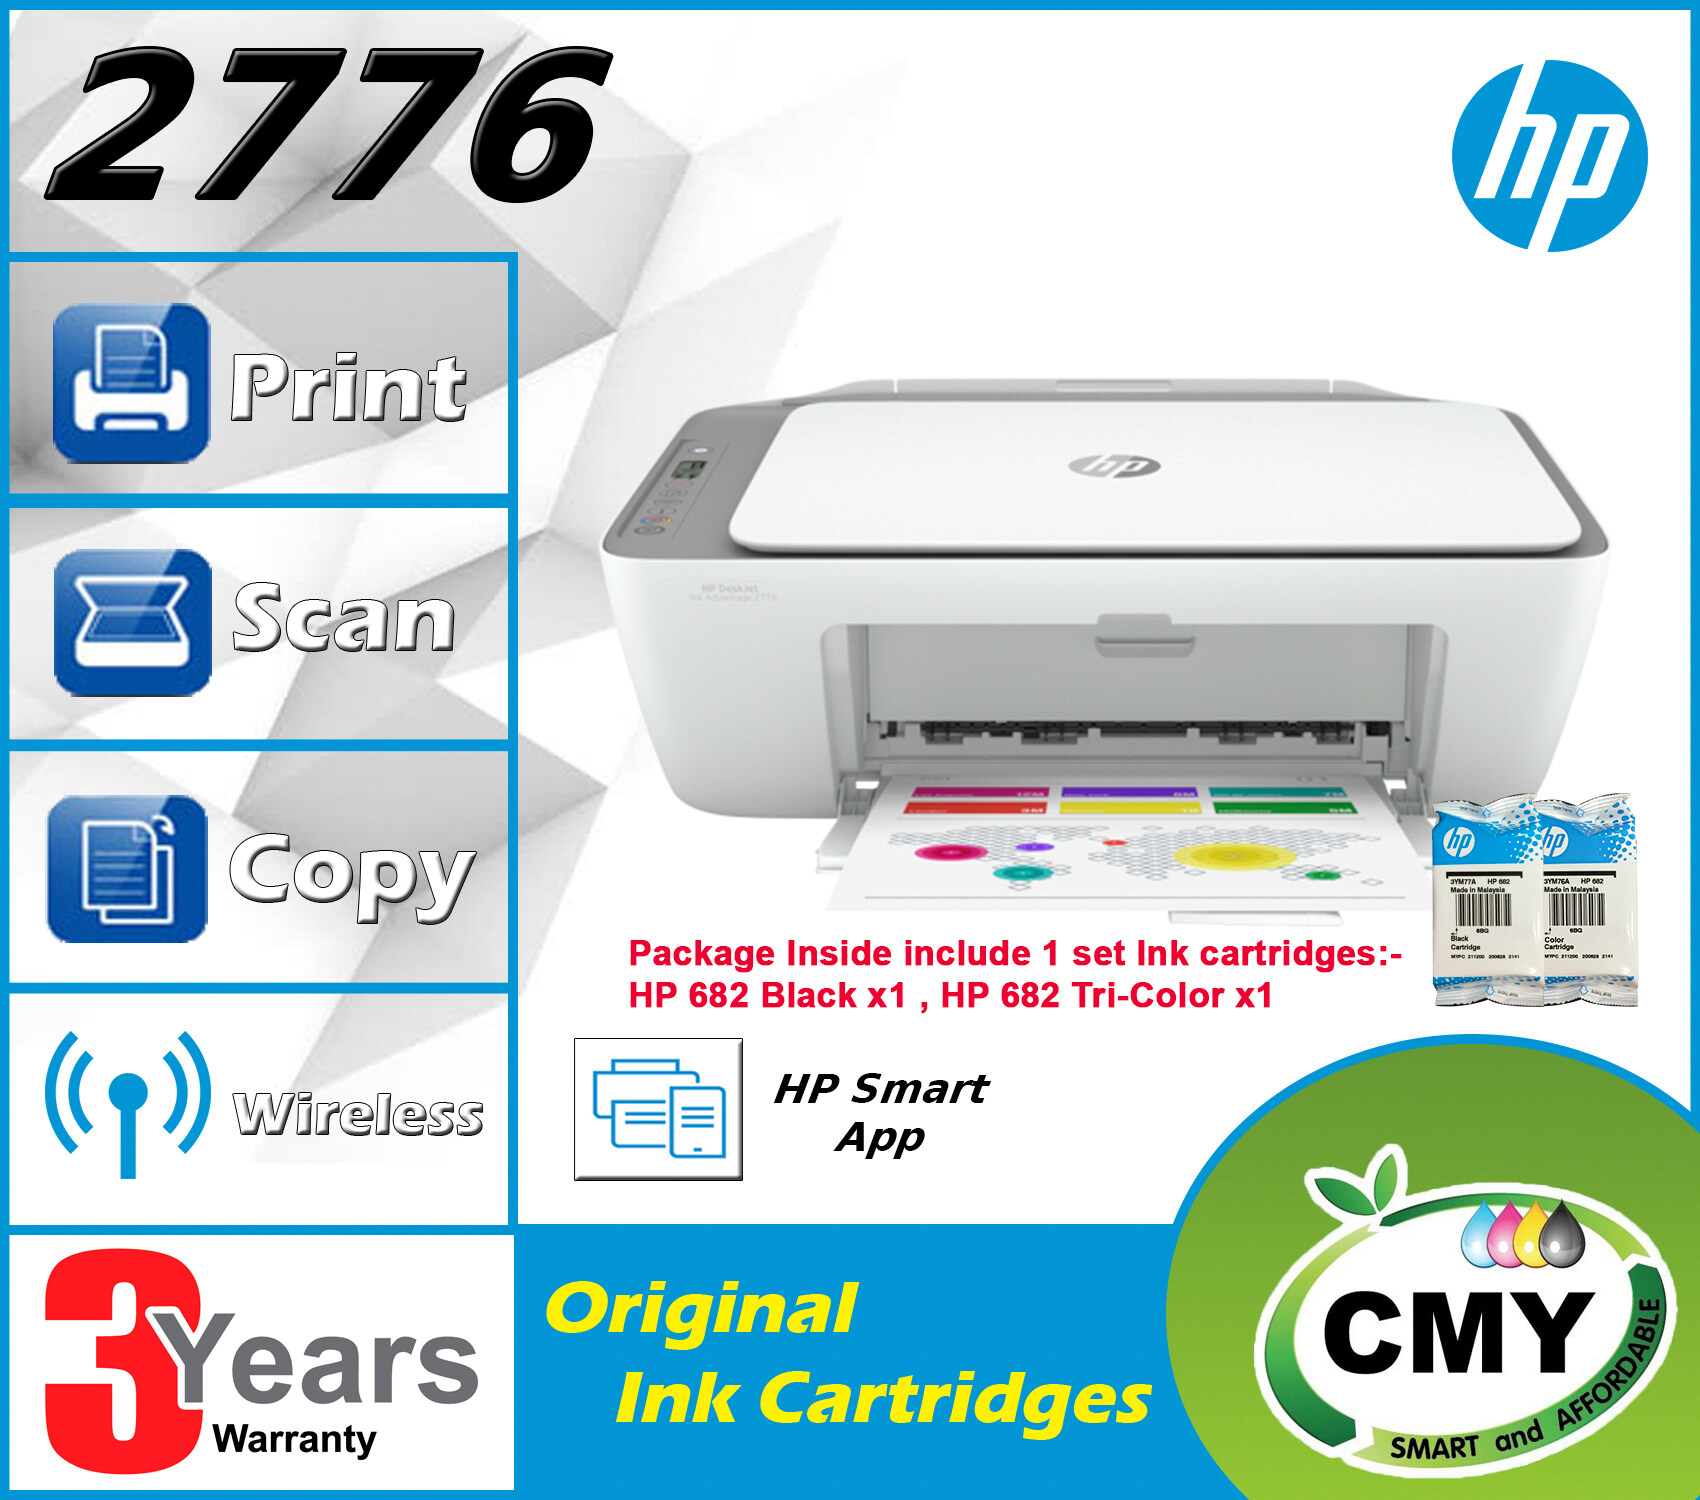 HP DeskJet Ink Advantage 2776 / HP DeskJet Ink Advantage 2777 All-in-One Printer (WIFI,Print,Scan & Copy) similar as 2676 DCP-T510W E470 L3150 MFC-J200 DCP-J105 2776